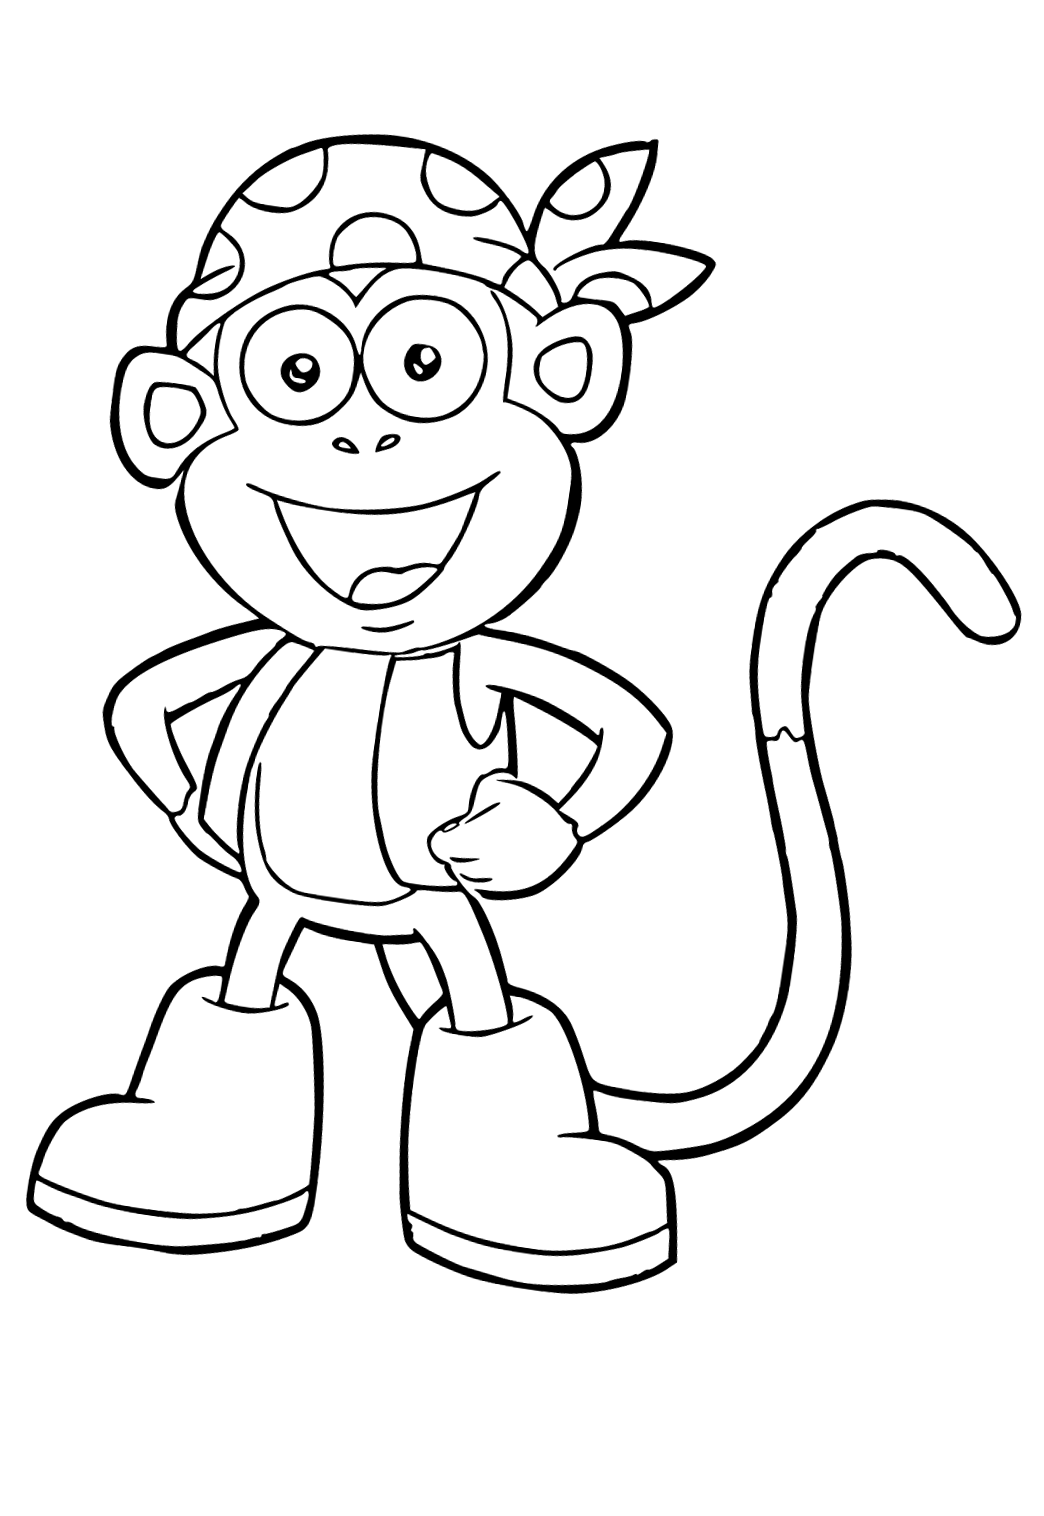 Free Printable Cartoon Characters Pirate Coloring Page for Adults and ...